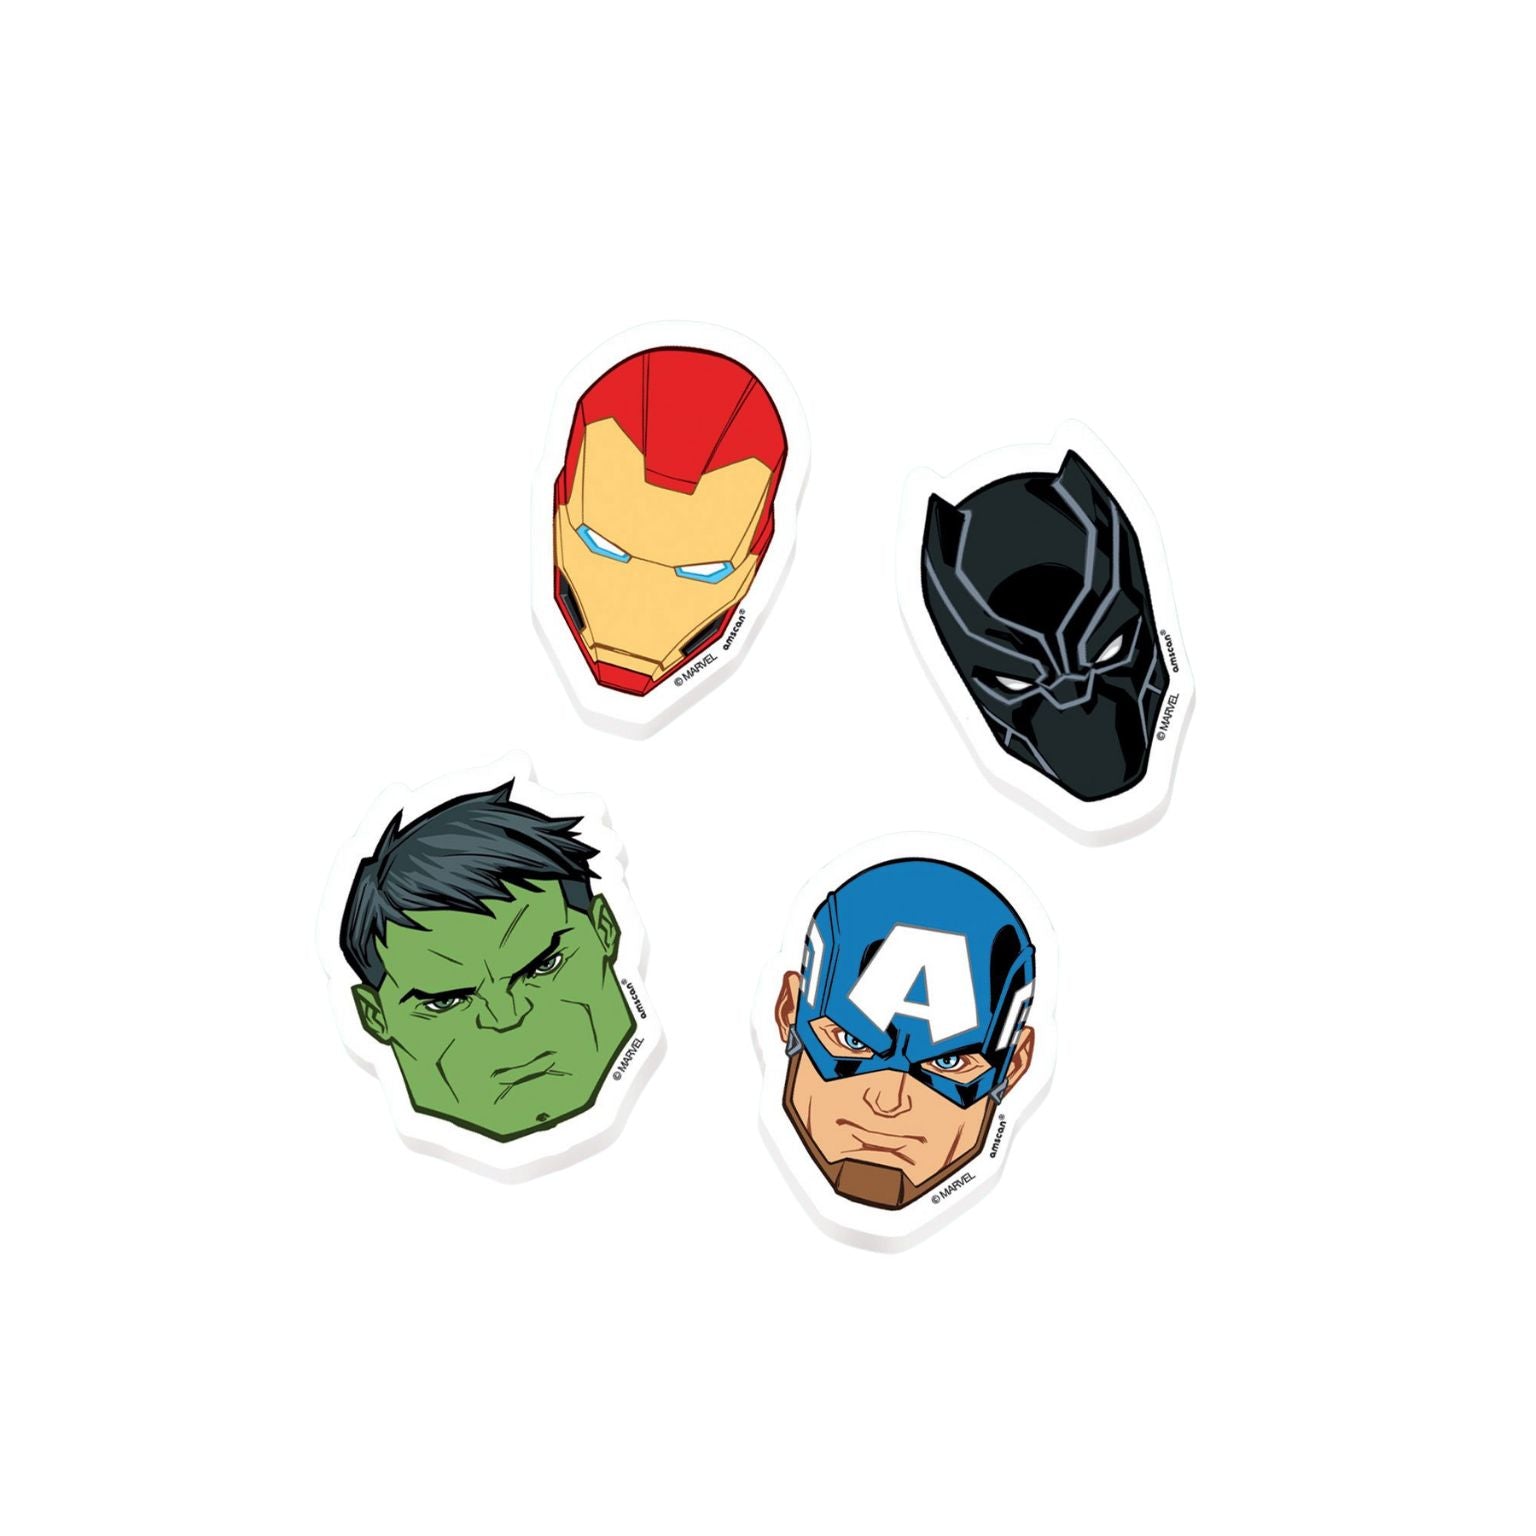 Anagram Avengers Powers Unite Erasers Party Favors with four Avenger figures Head